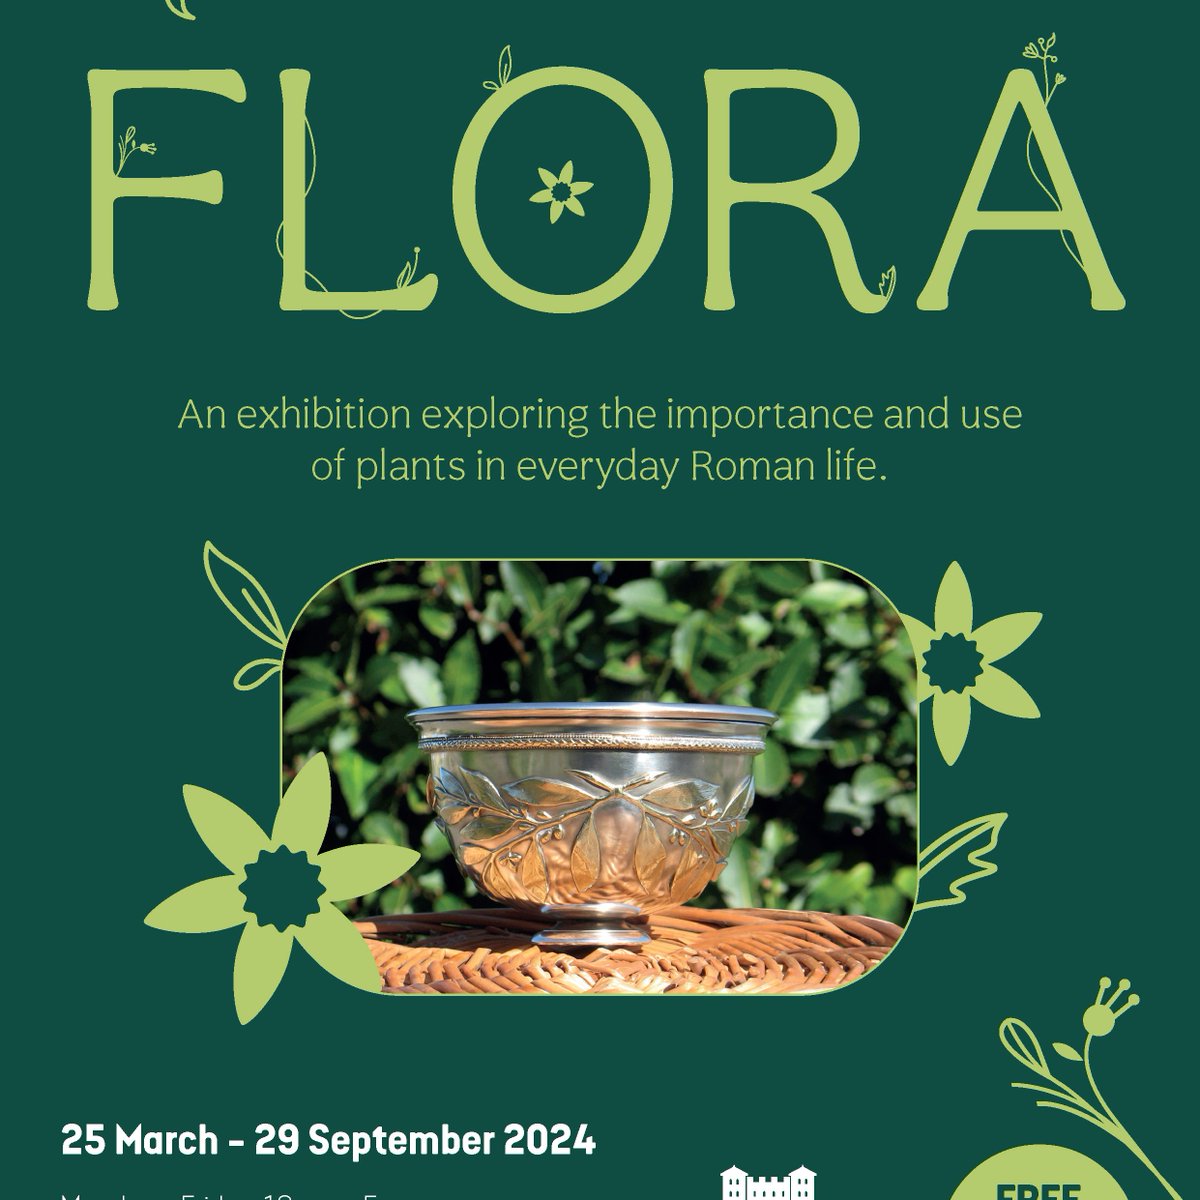 We re-open to the public at 10am Mon 25 March. Visit our new exhibition 'Flora' which explores the use of plants & flowers in everyday #Roman life. Lots of activities going on over the Easter holidays: arbeiaromanfort.org.uk/whats-on @STyne_Council @STynesideEvents #SouthShields